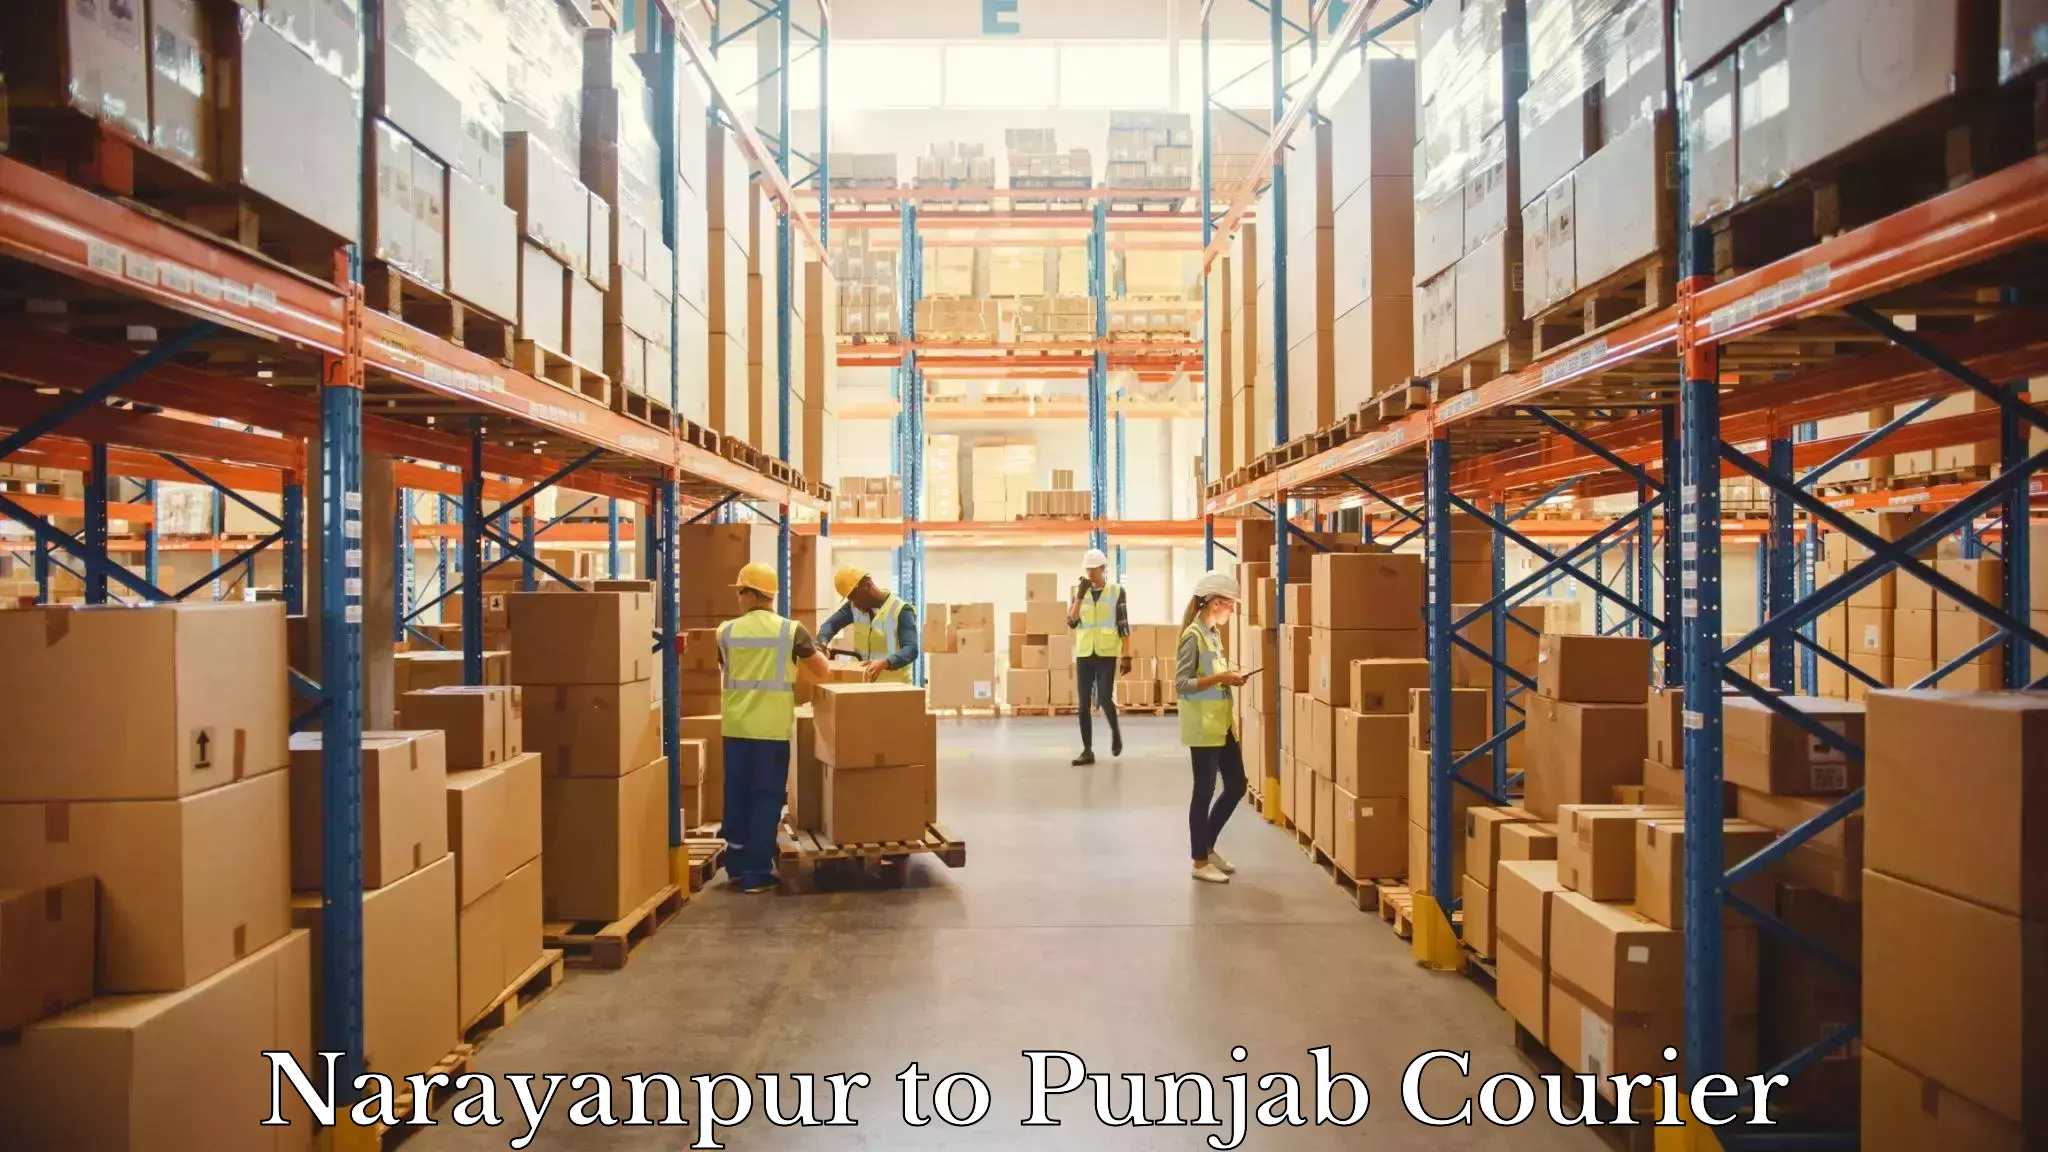 Efficient shipping operations Narayanpur to Ludhiana